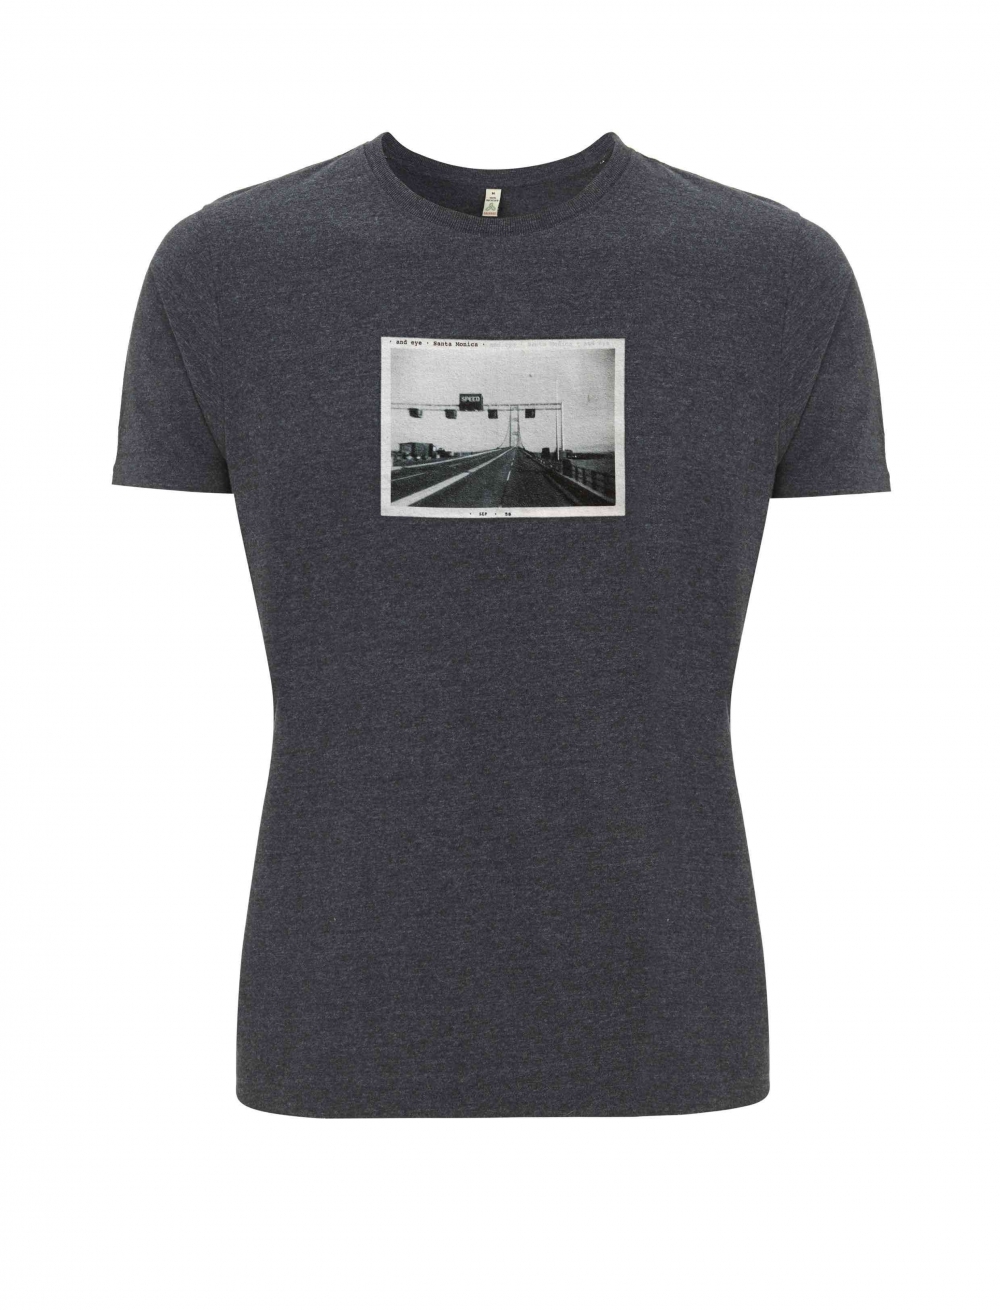 Recycled classic t-shirt with a vintage image